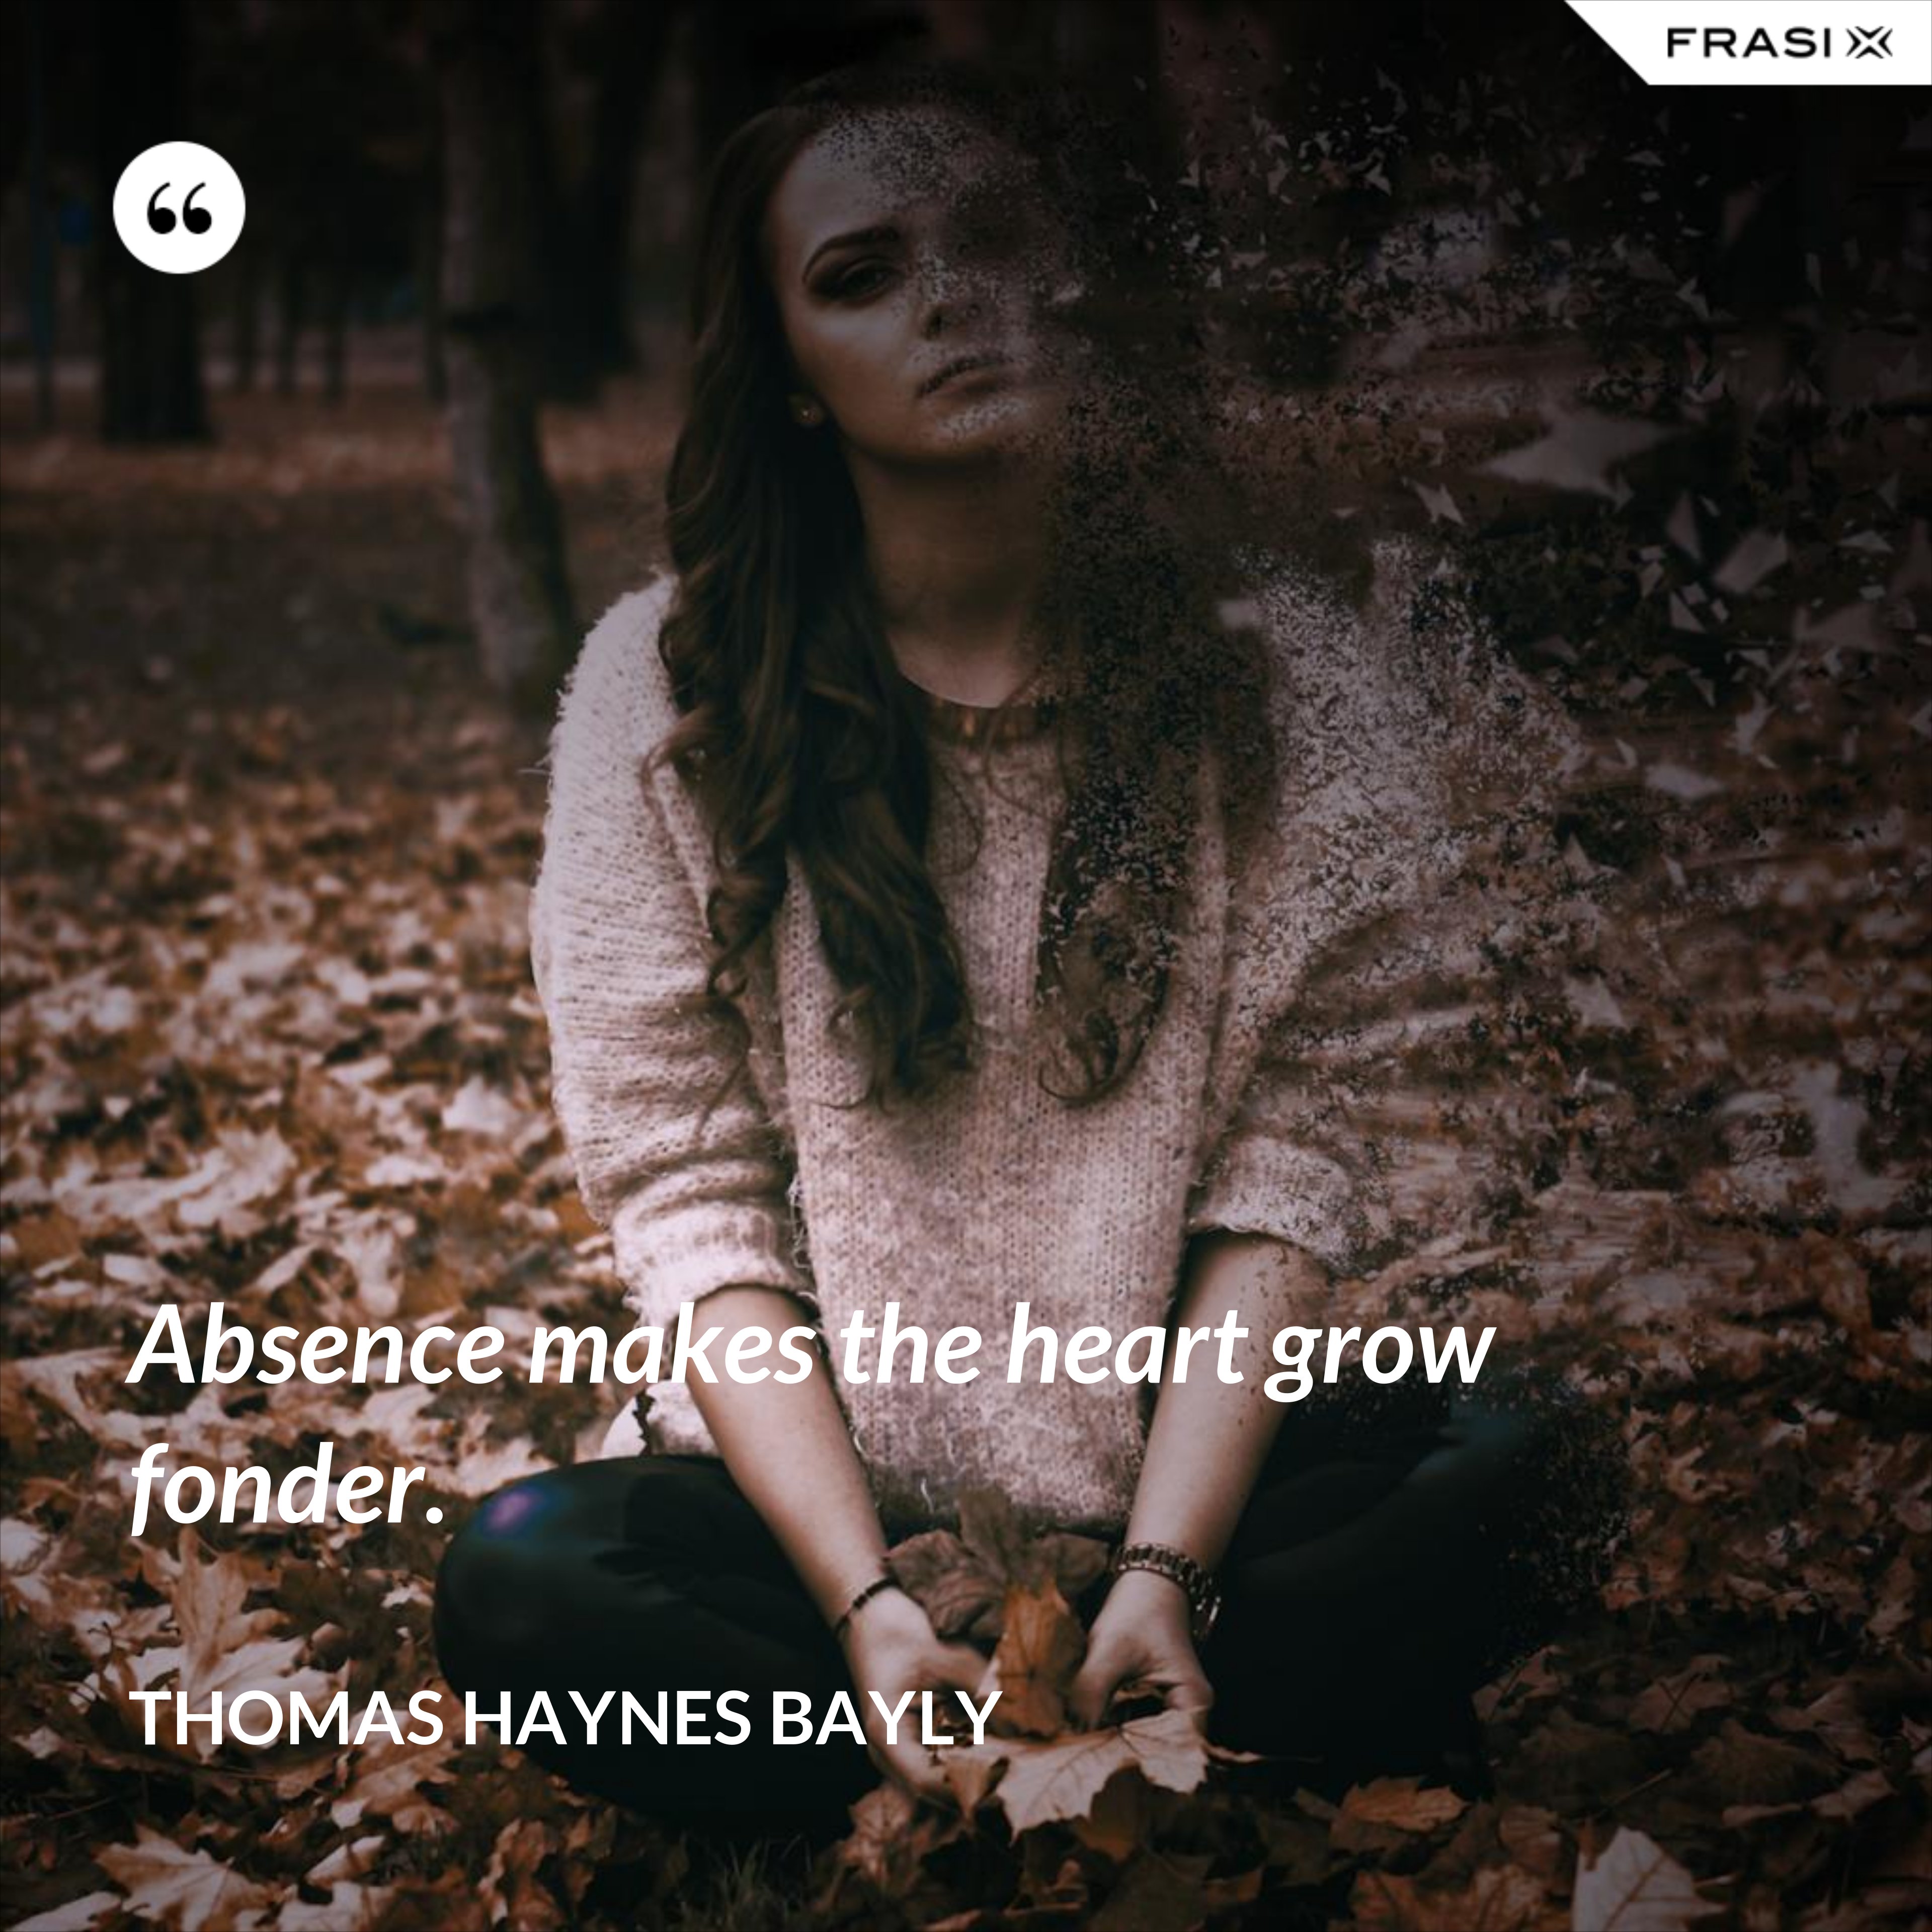 Absence makes the heart grow fonder. - Thomas Haynes Bayly